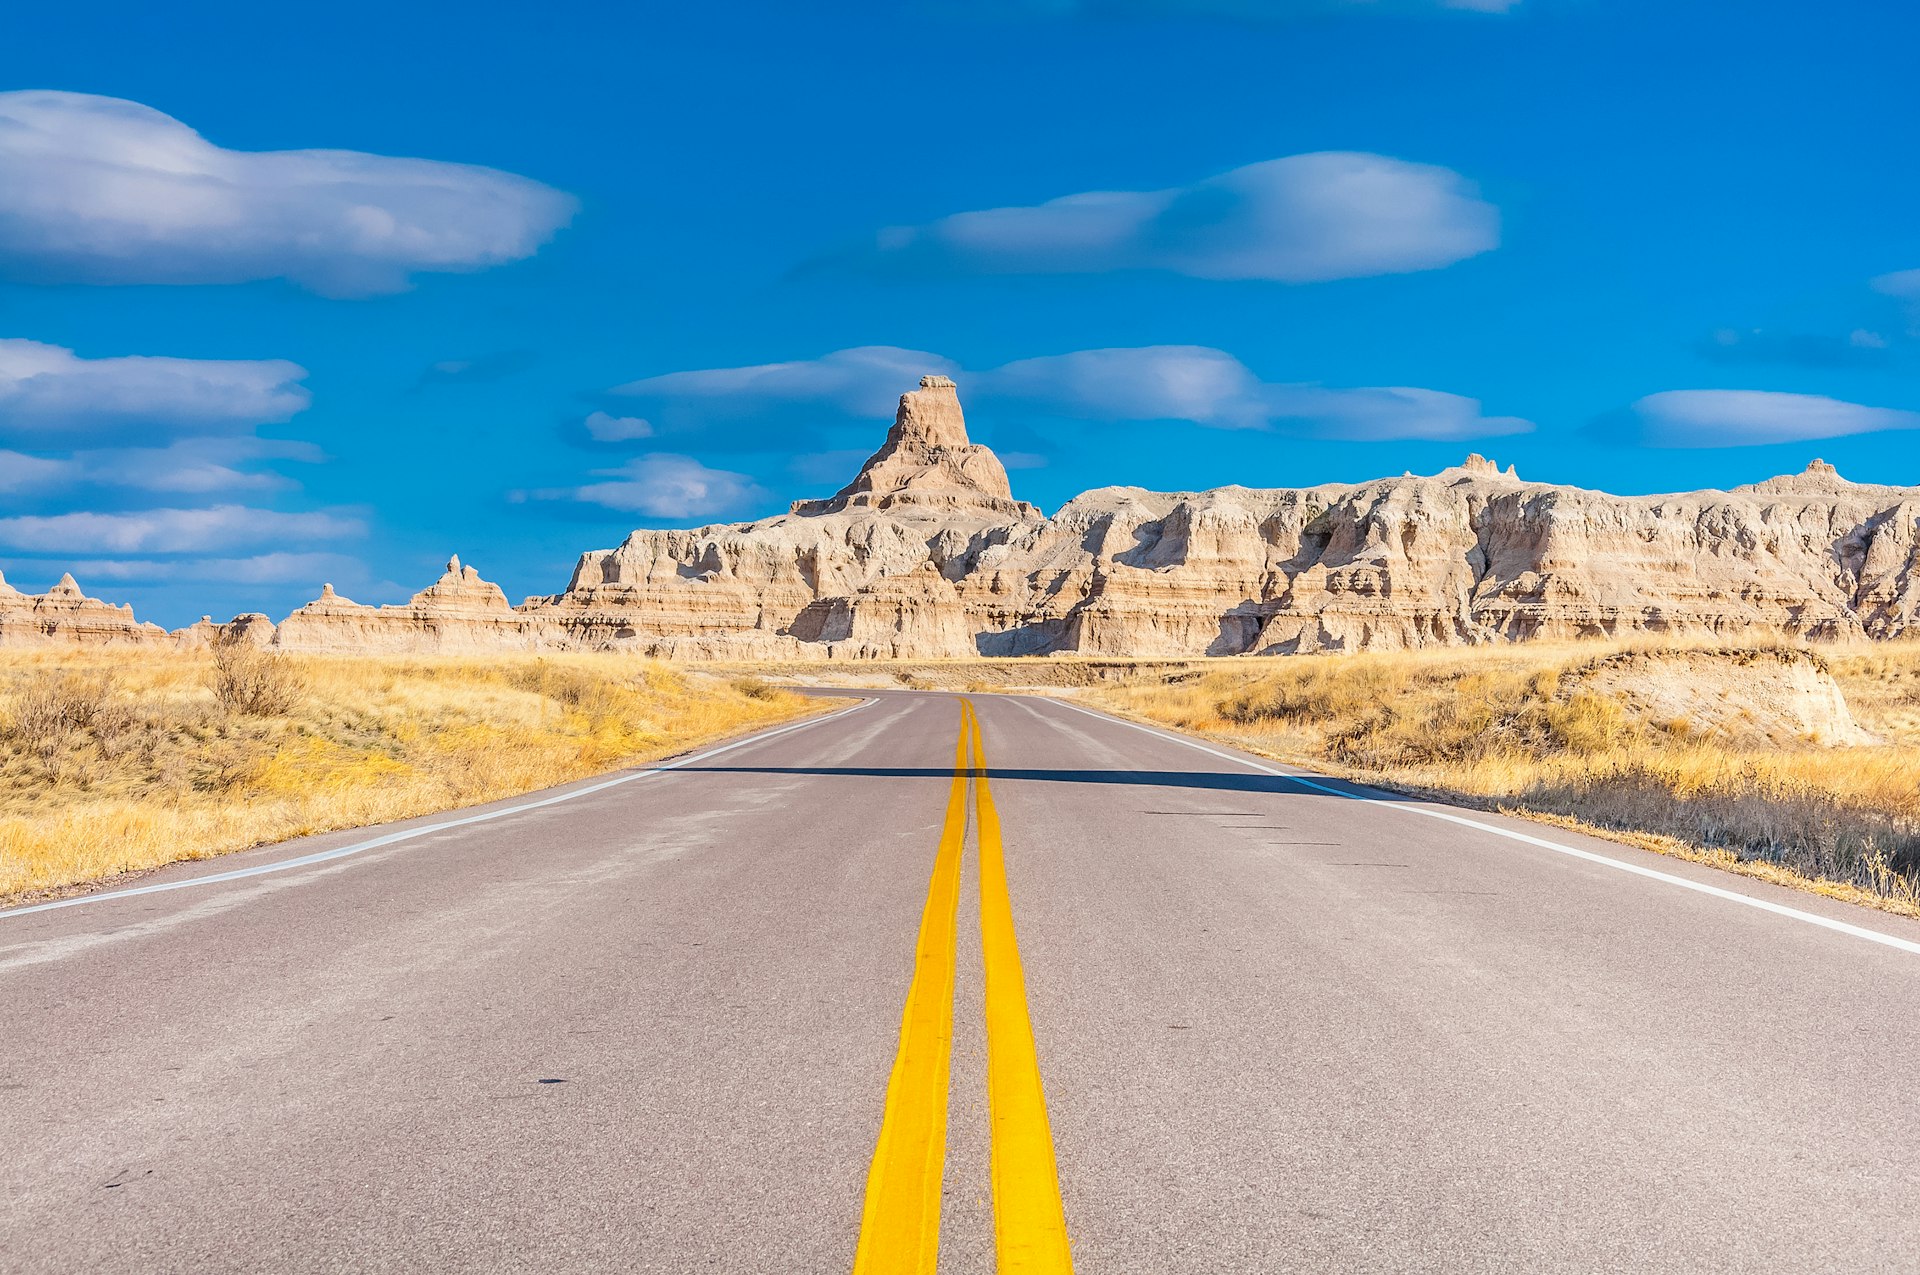 A straight empty road stretches through Badlands National Park, with large rock formations in the distance against a blue sky